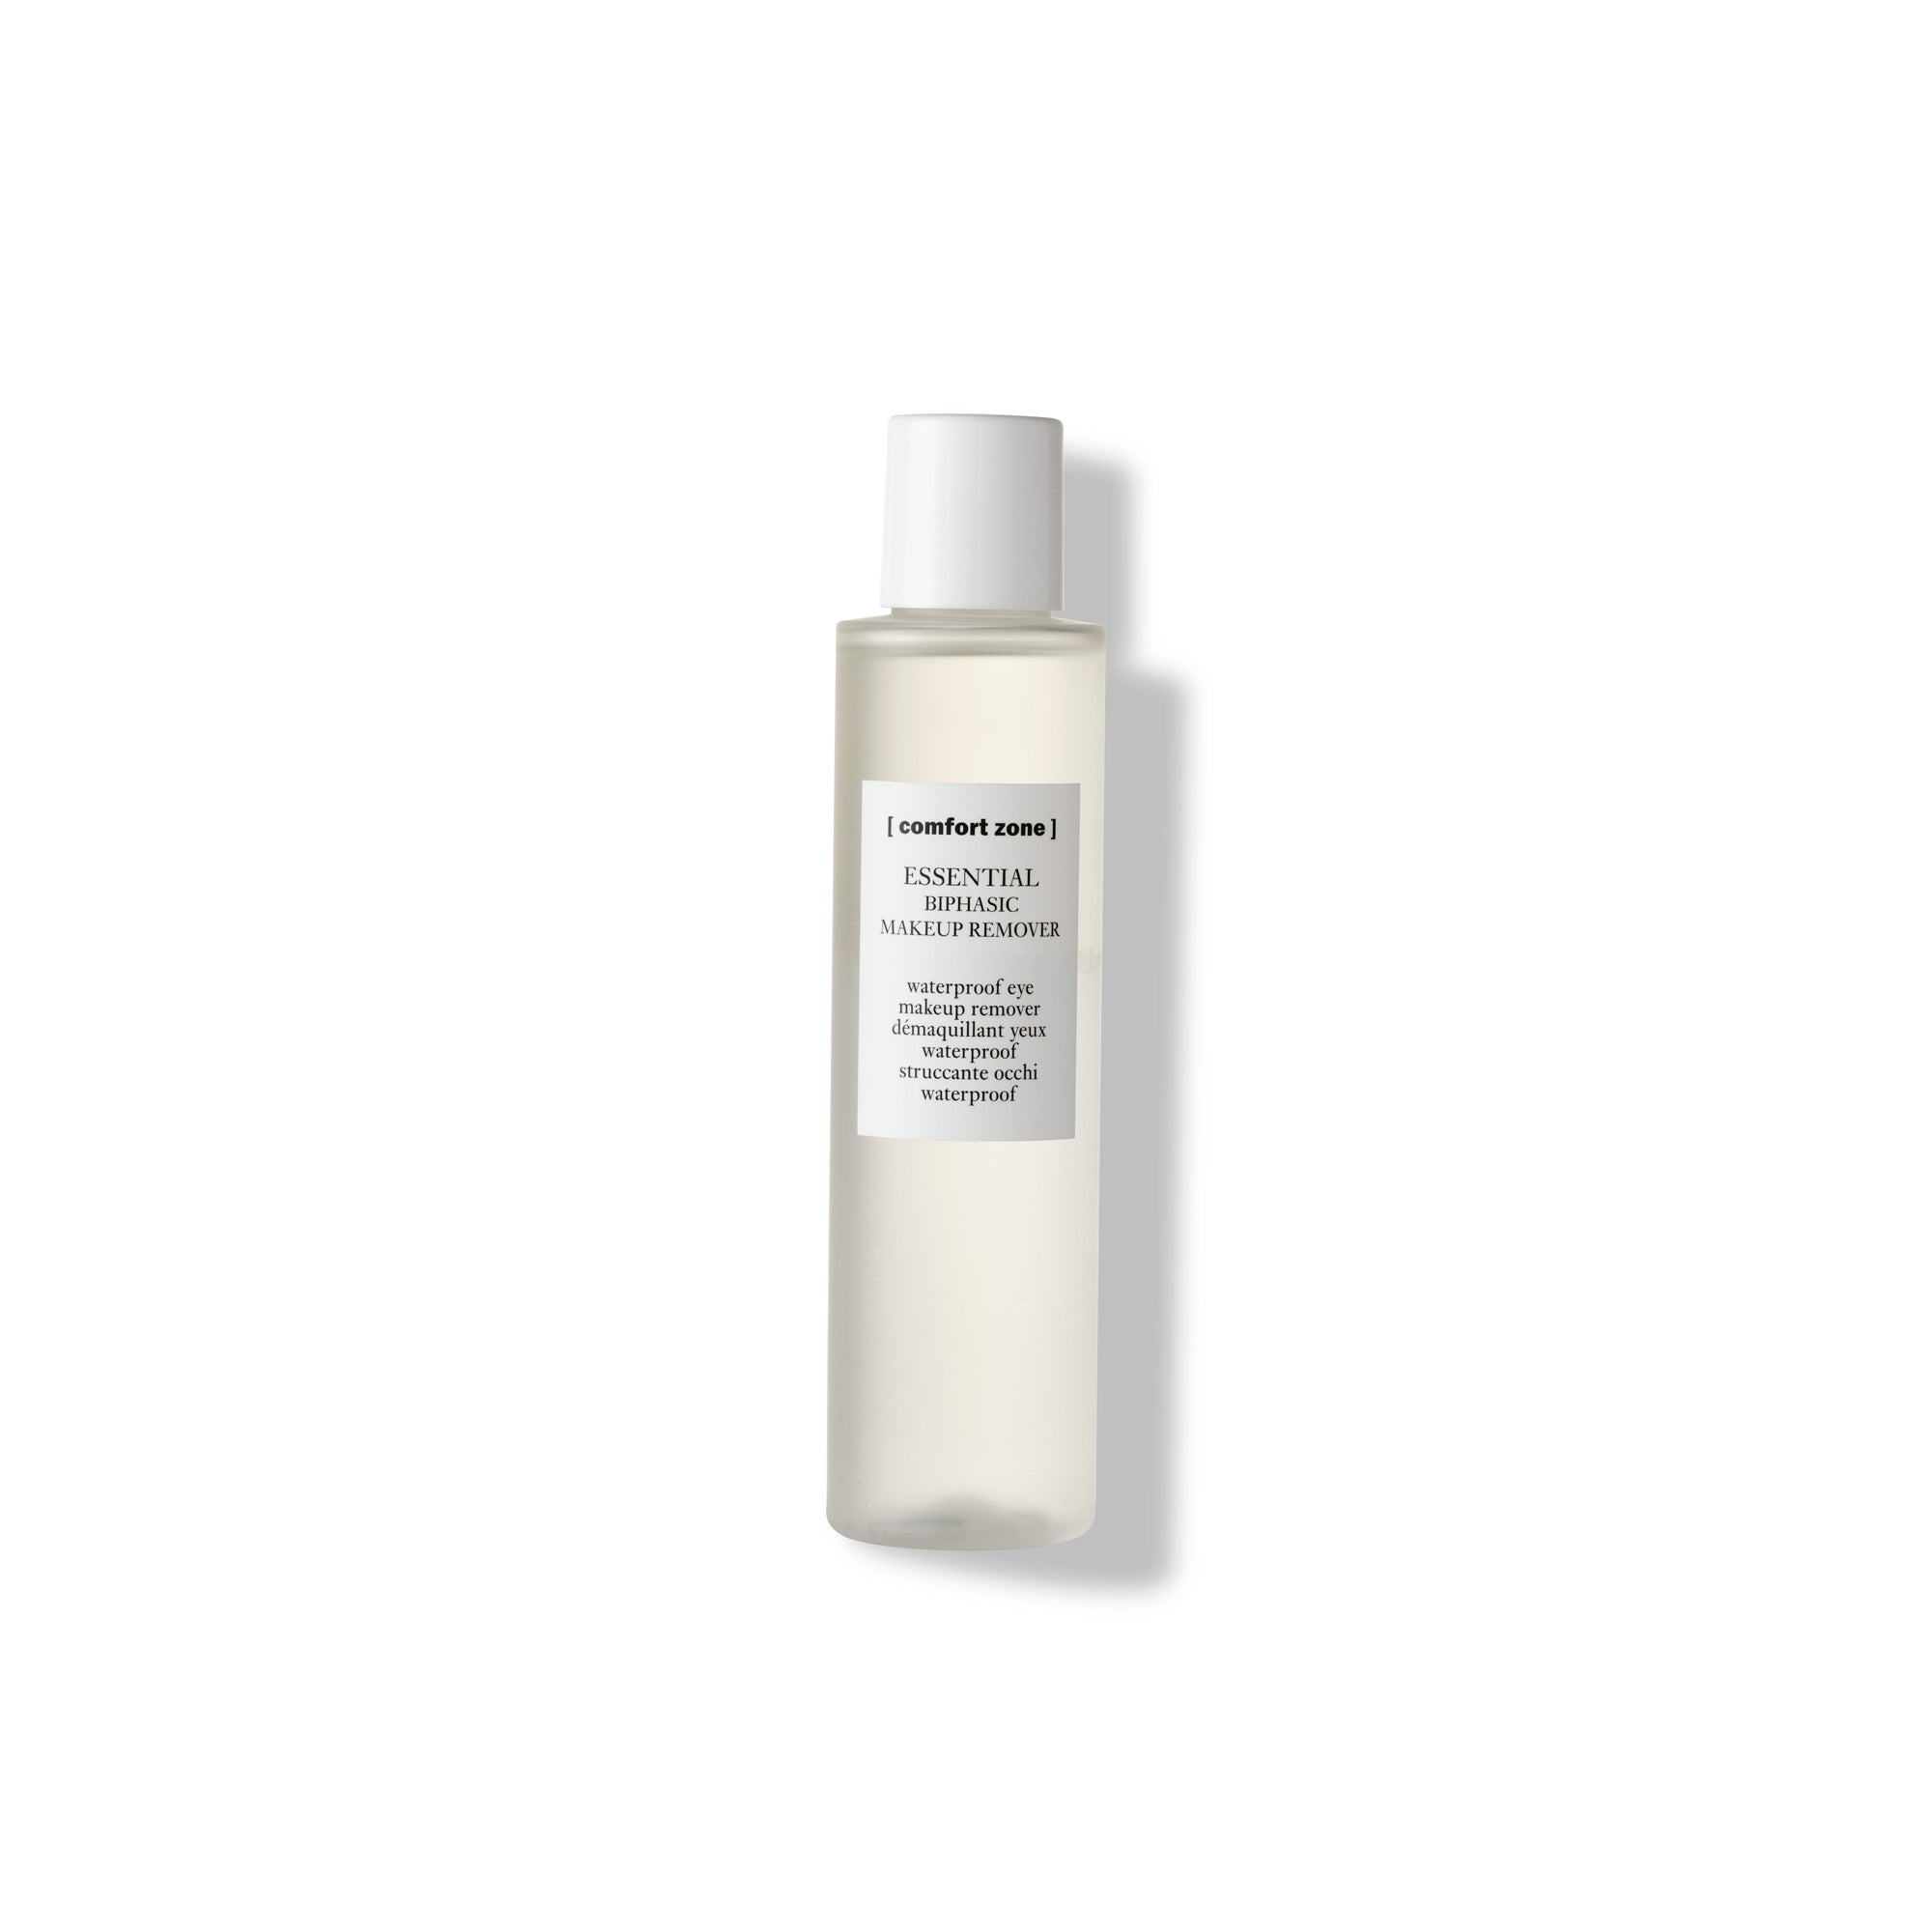 Comfort Zone: ESSENTIAL BIPHASIC MAKEUP REMOVER Struccante occhi waterproof-
